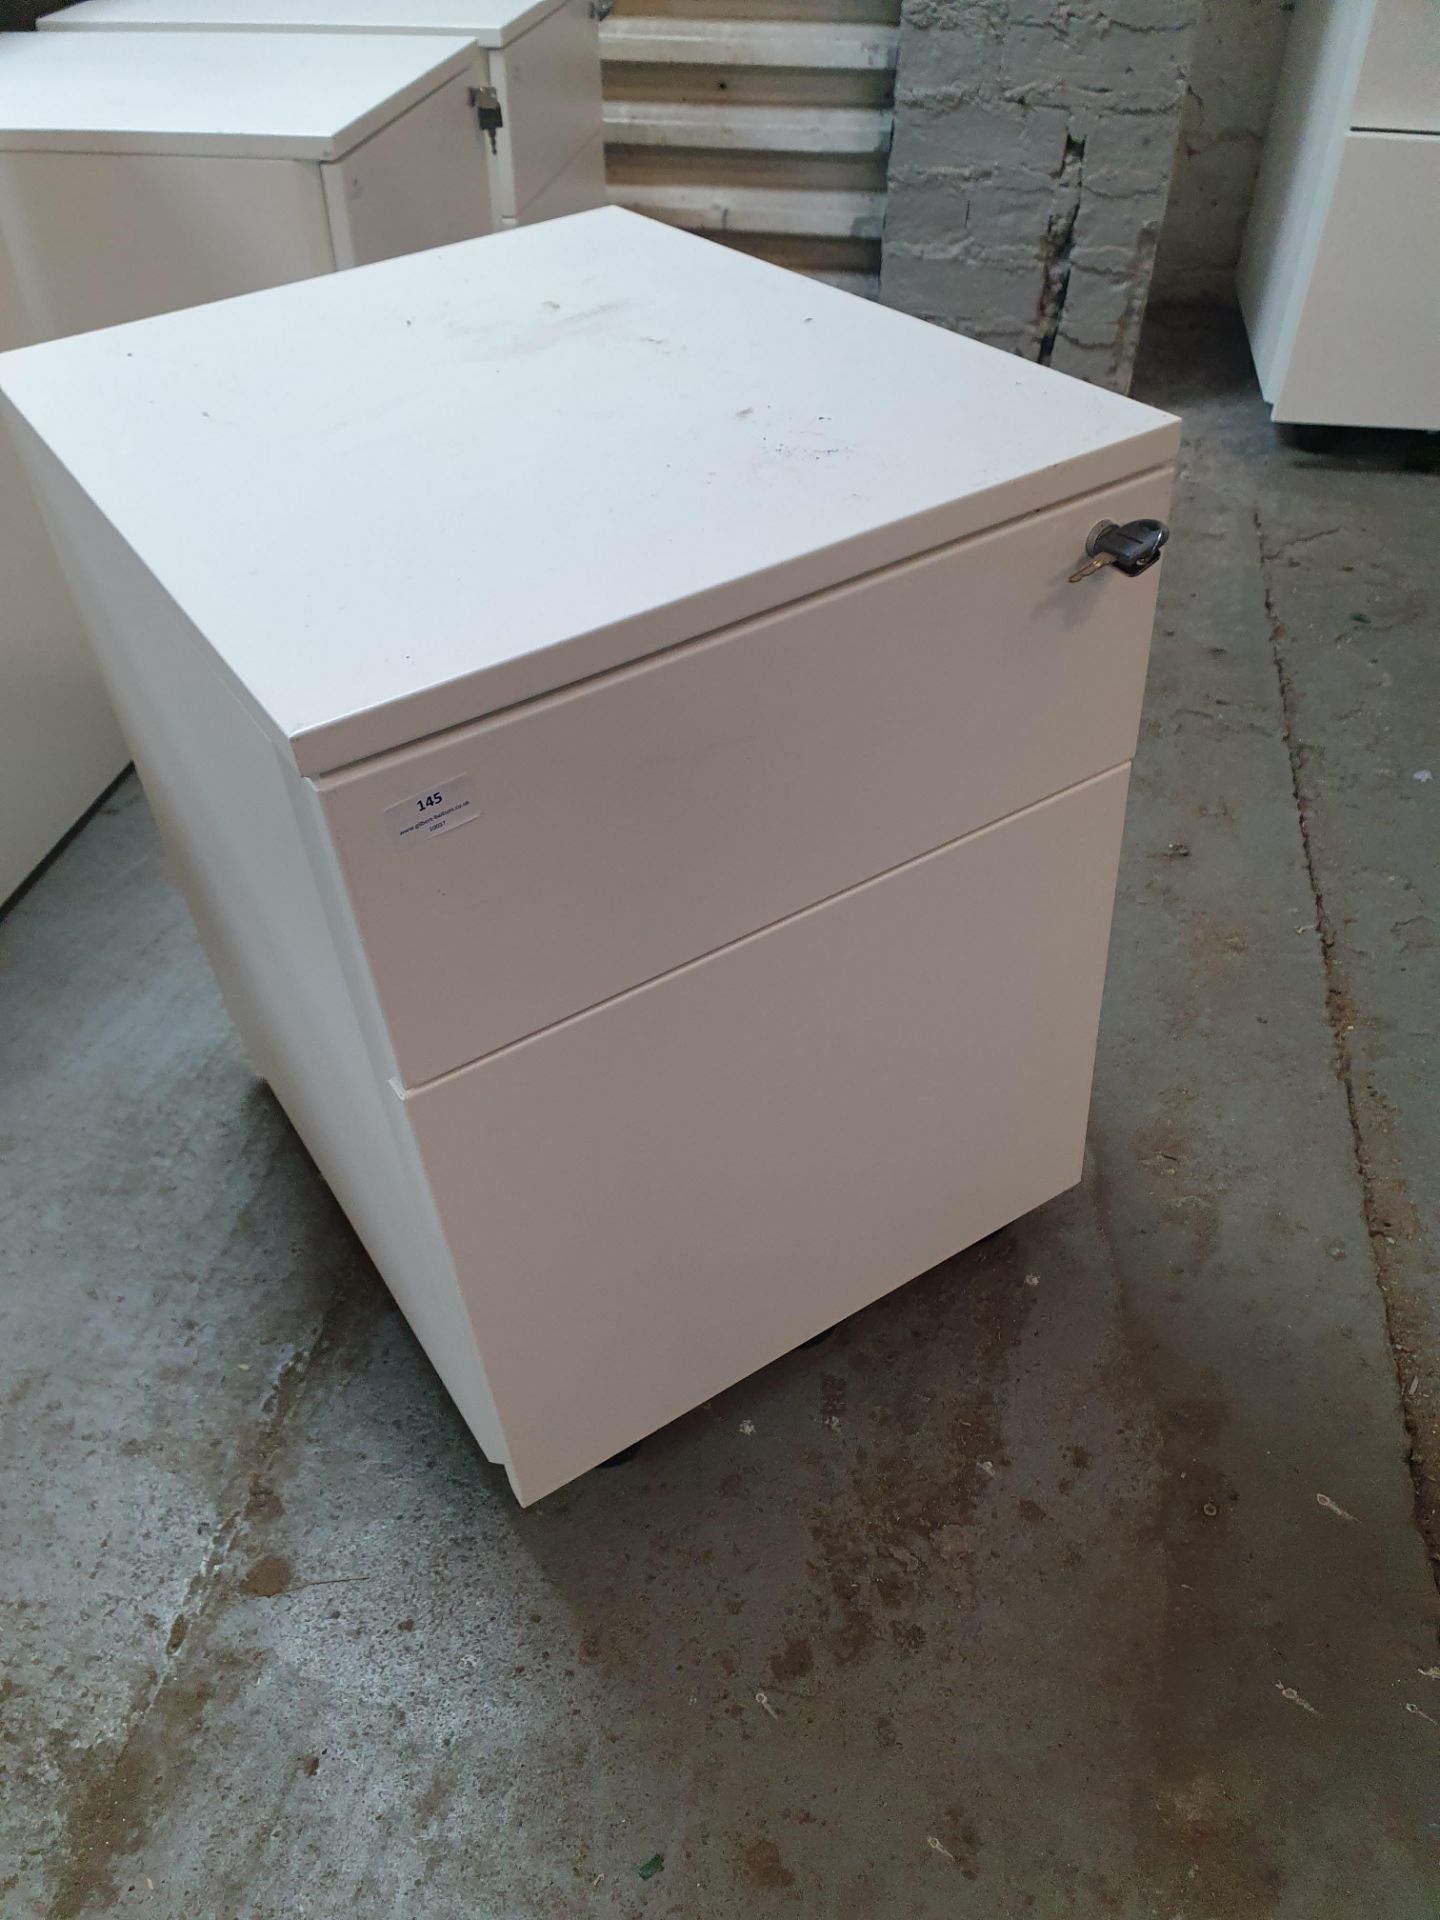 * sturdy office filing pedestal drawers - 440w x 550d x 590h. Metal construction with 5 x castors to